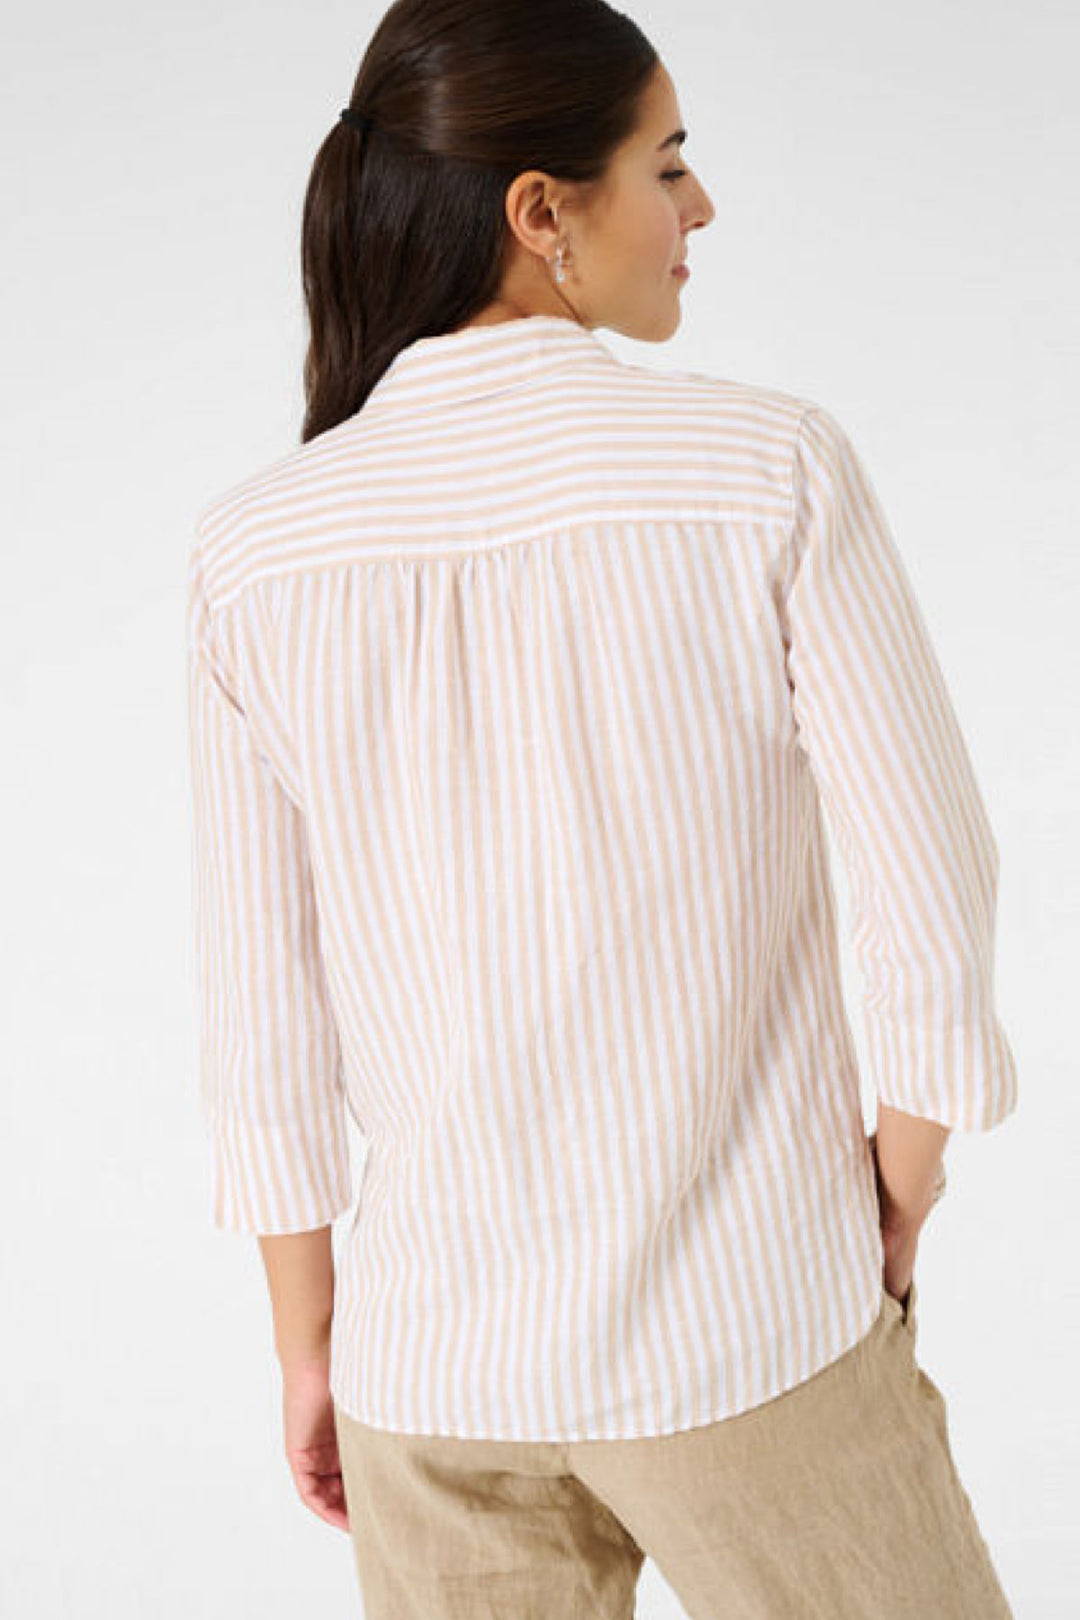 Pinstriped blouse